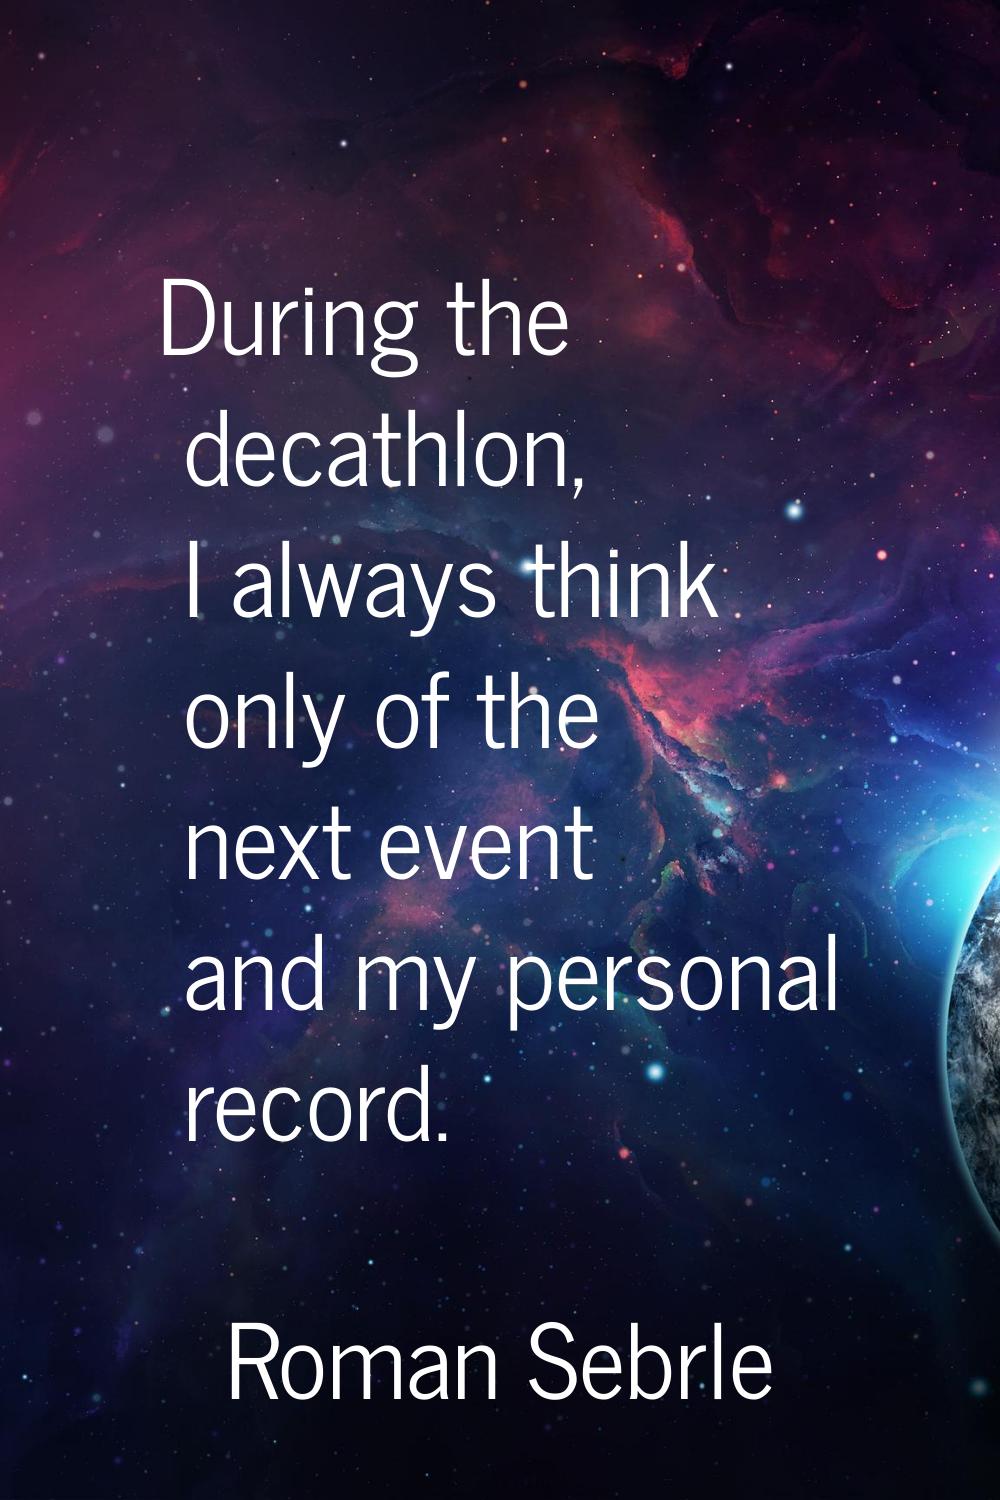 During the decathlon, I always think only of the next event and my personal record.